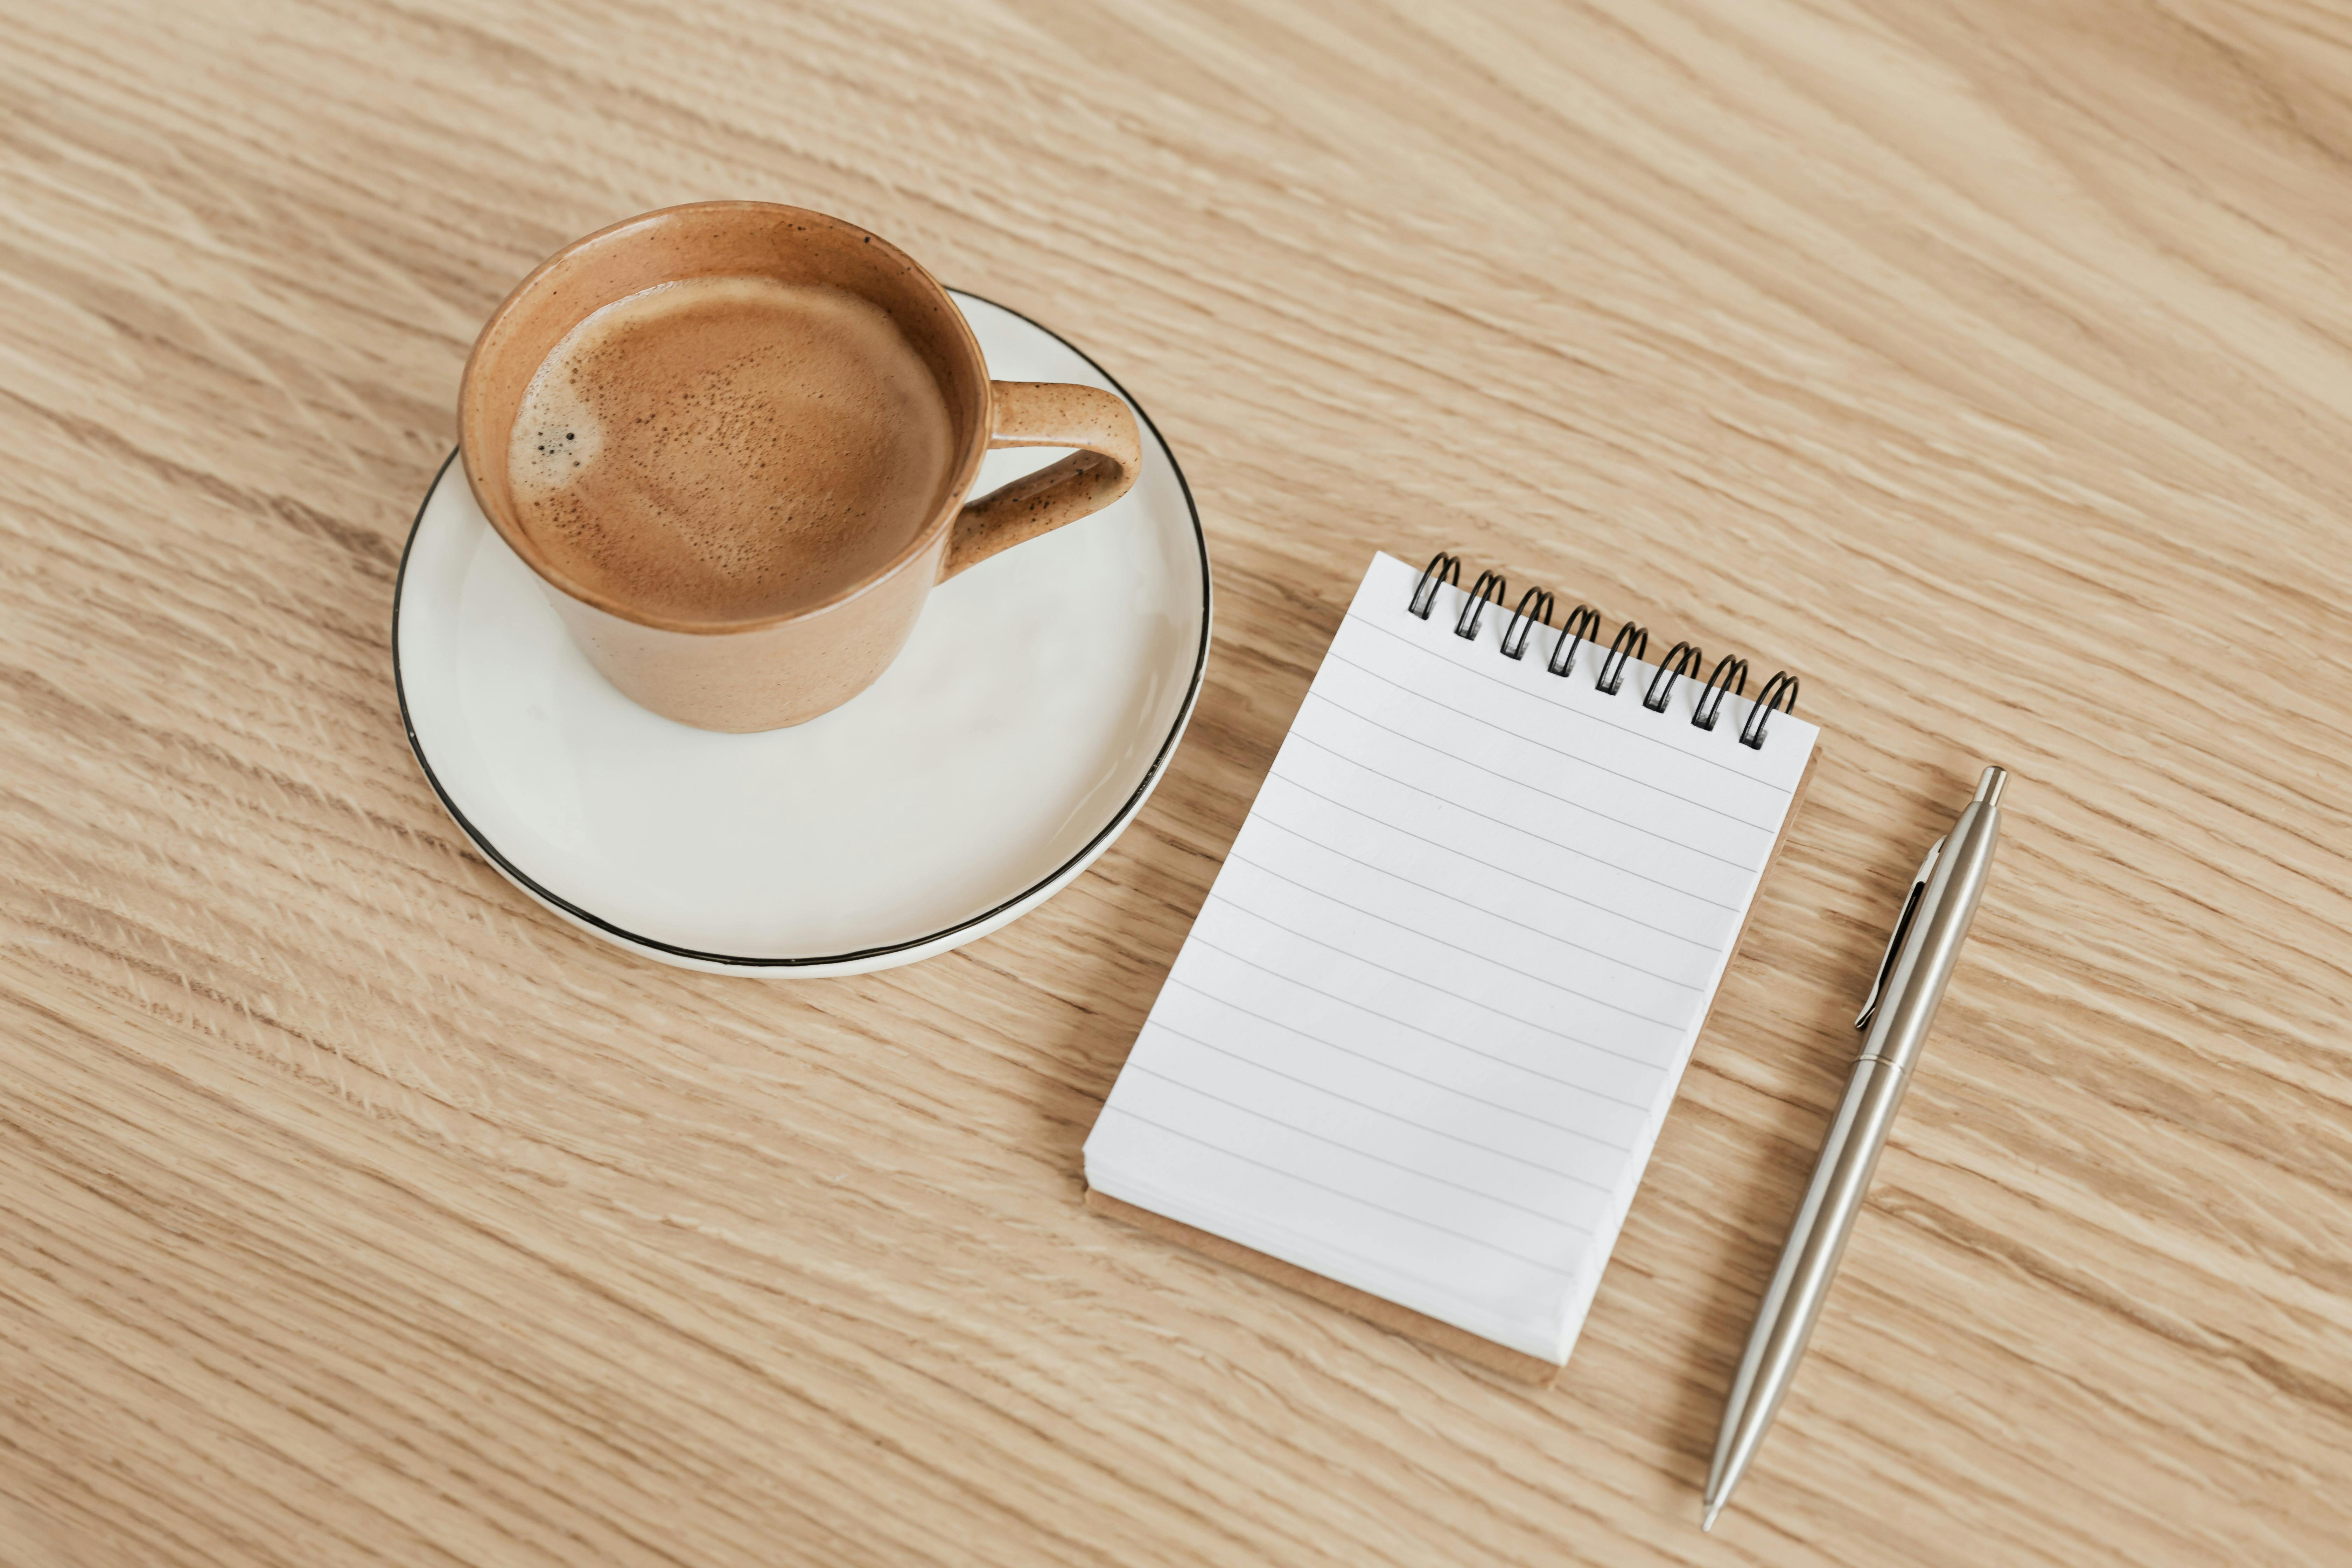 wooden table with coffee and notebook with pen